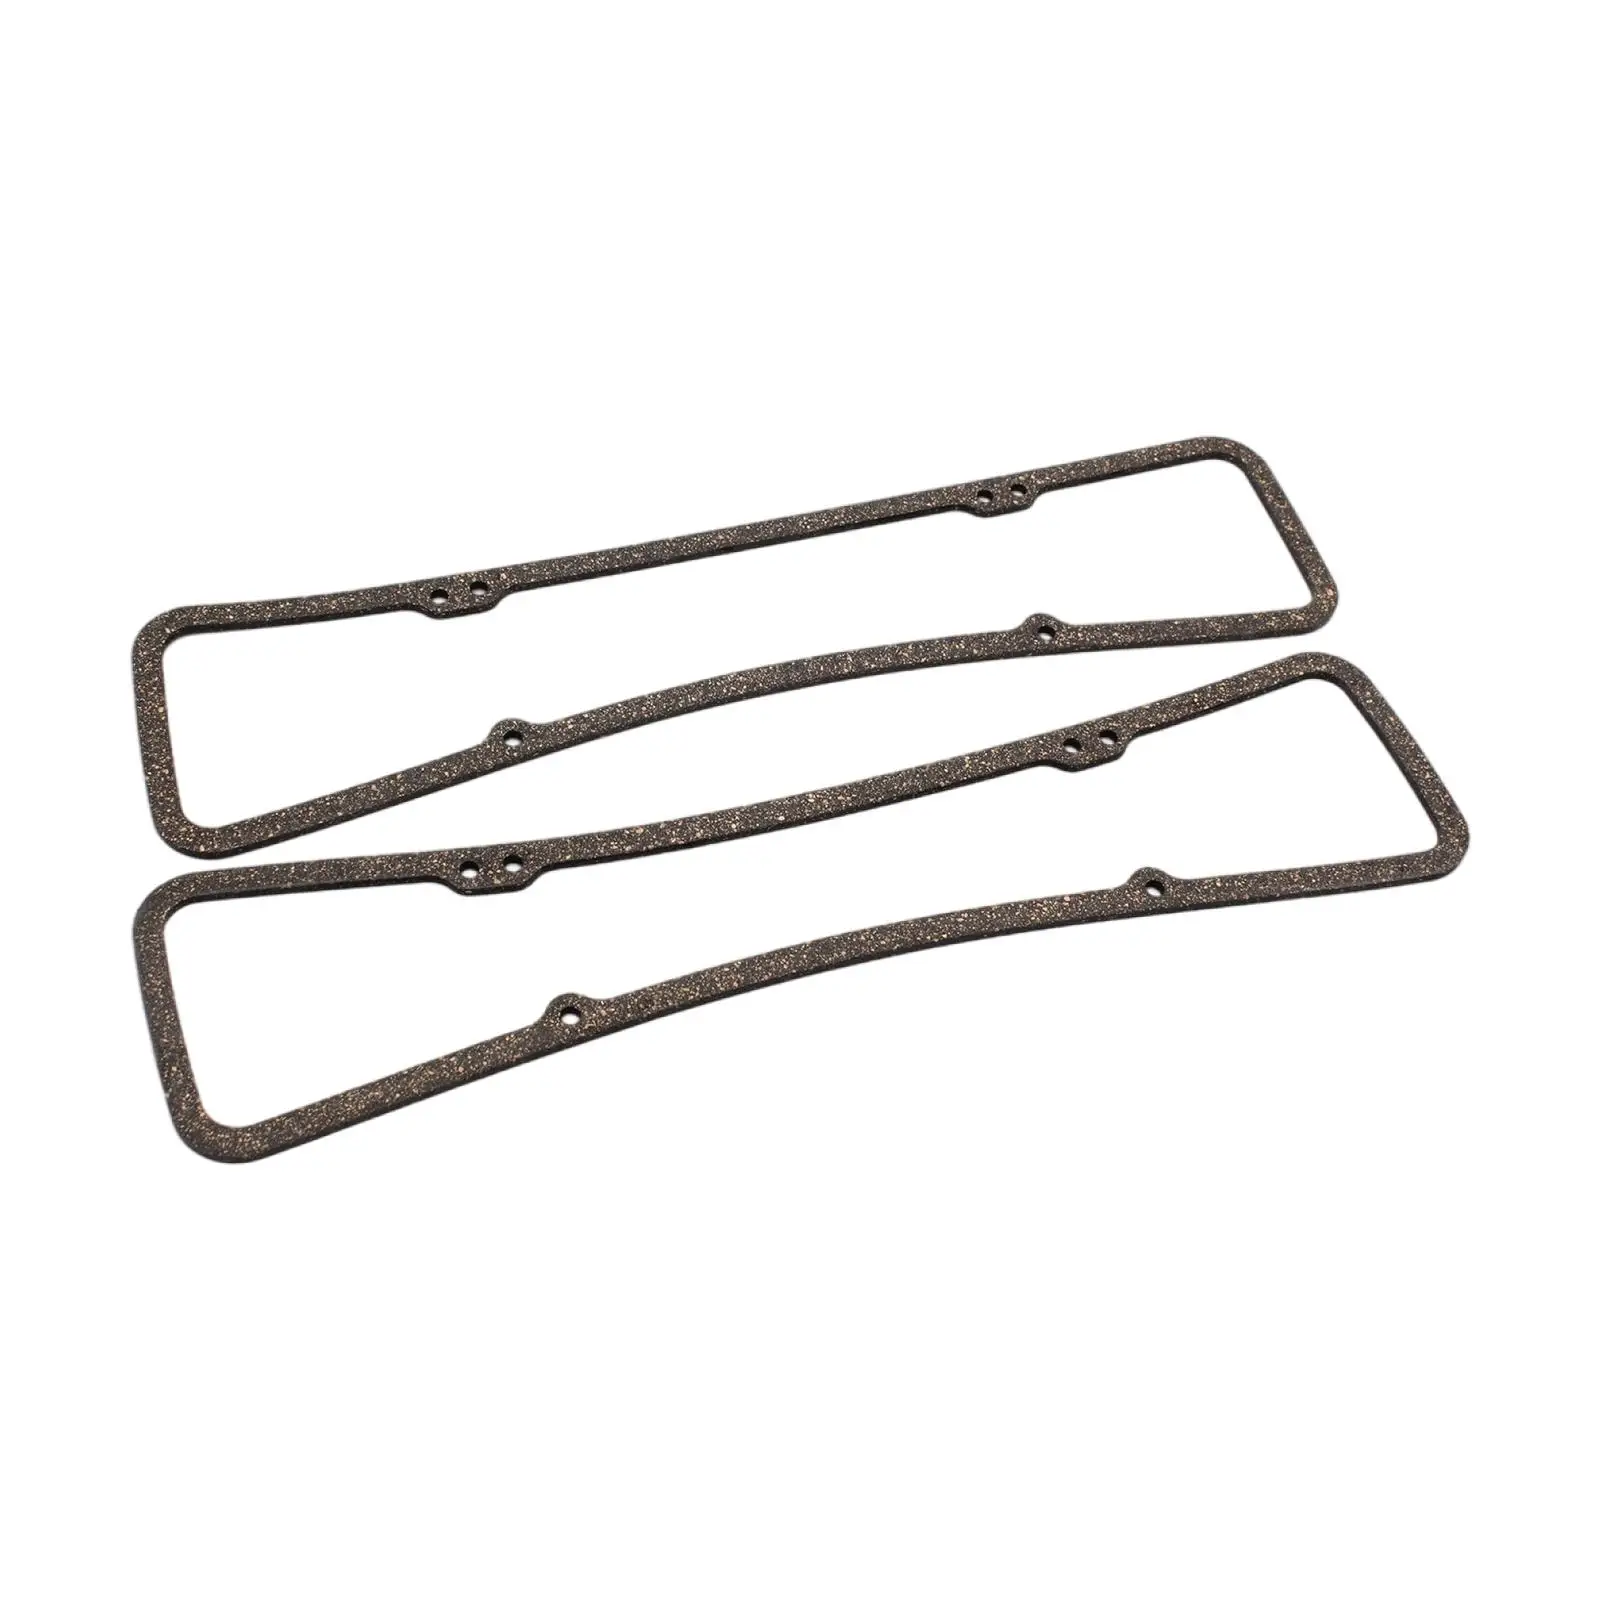 Valve Cover Gaskets Set 7483 2x Fit for 305 327 350 383 400 Engines